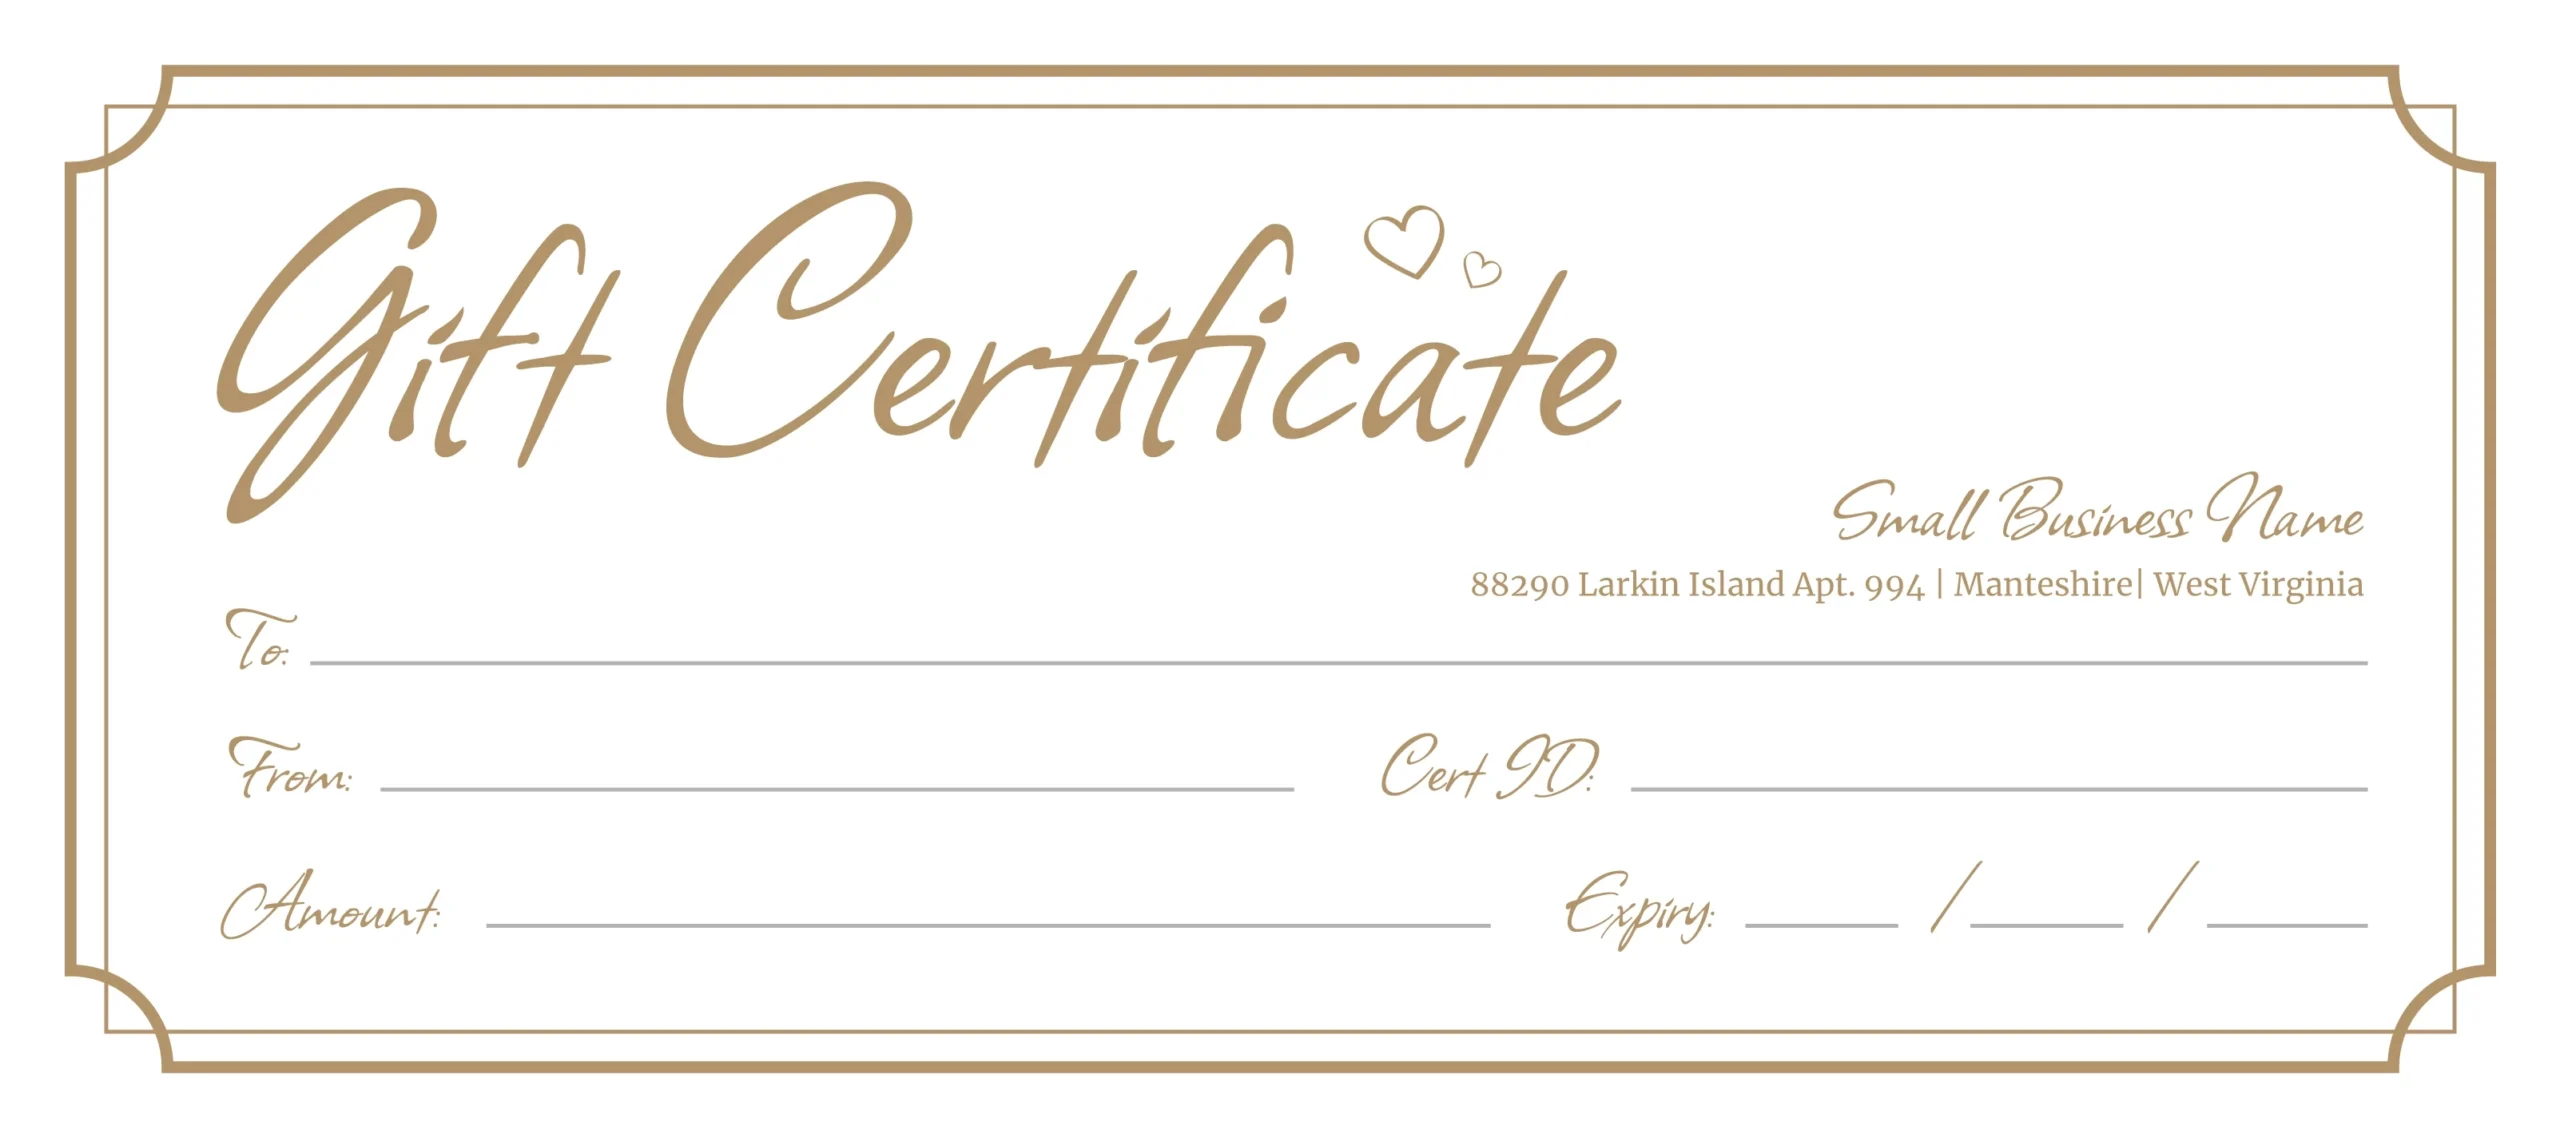 Blank Gift Certificate Free Google Docs Template - Gdoc.io inside Free Printable Gift Coupons